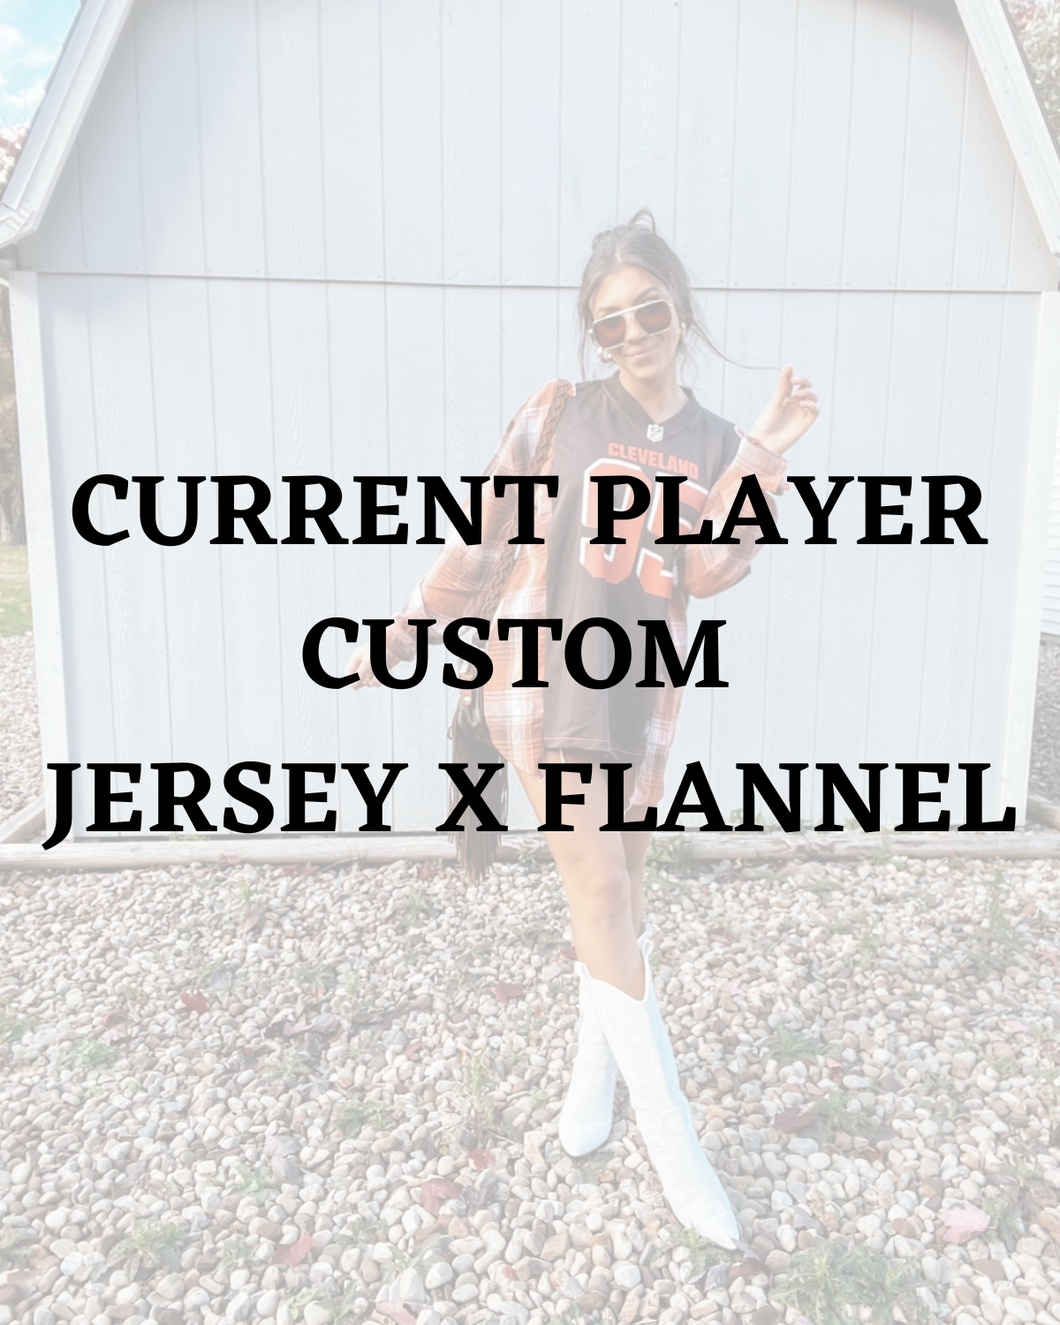 CURRENT PLAYER CUSTOM JERSEY X FLANNEL